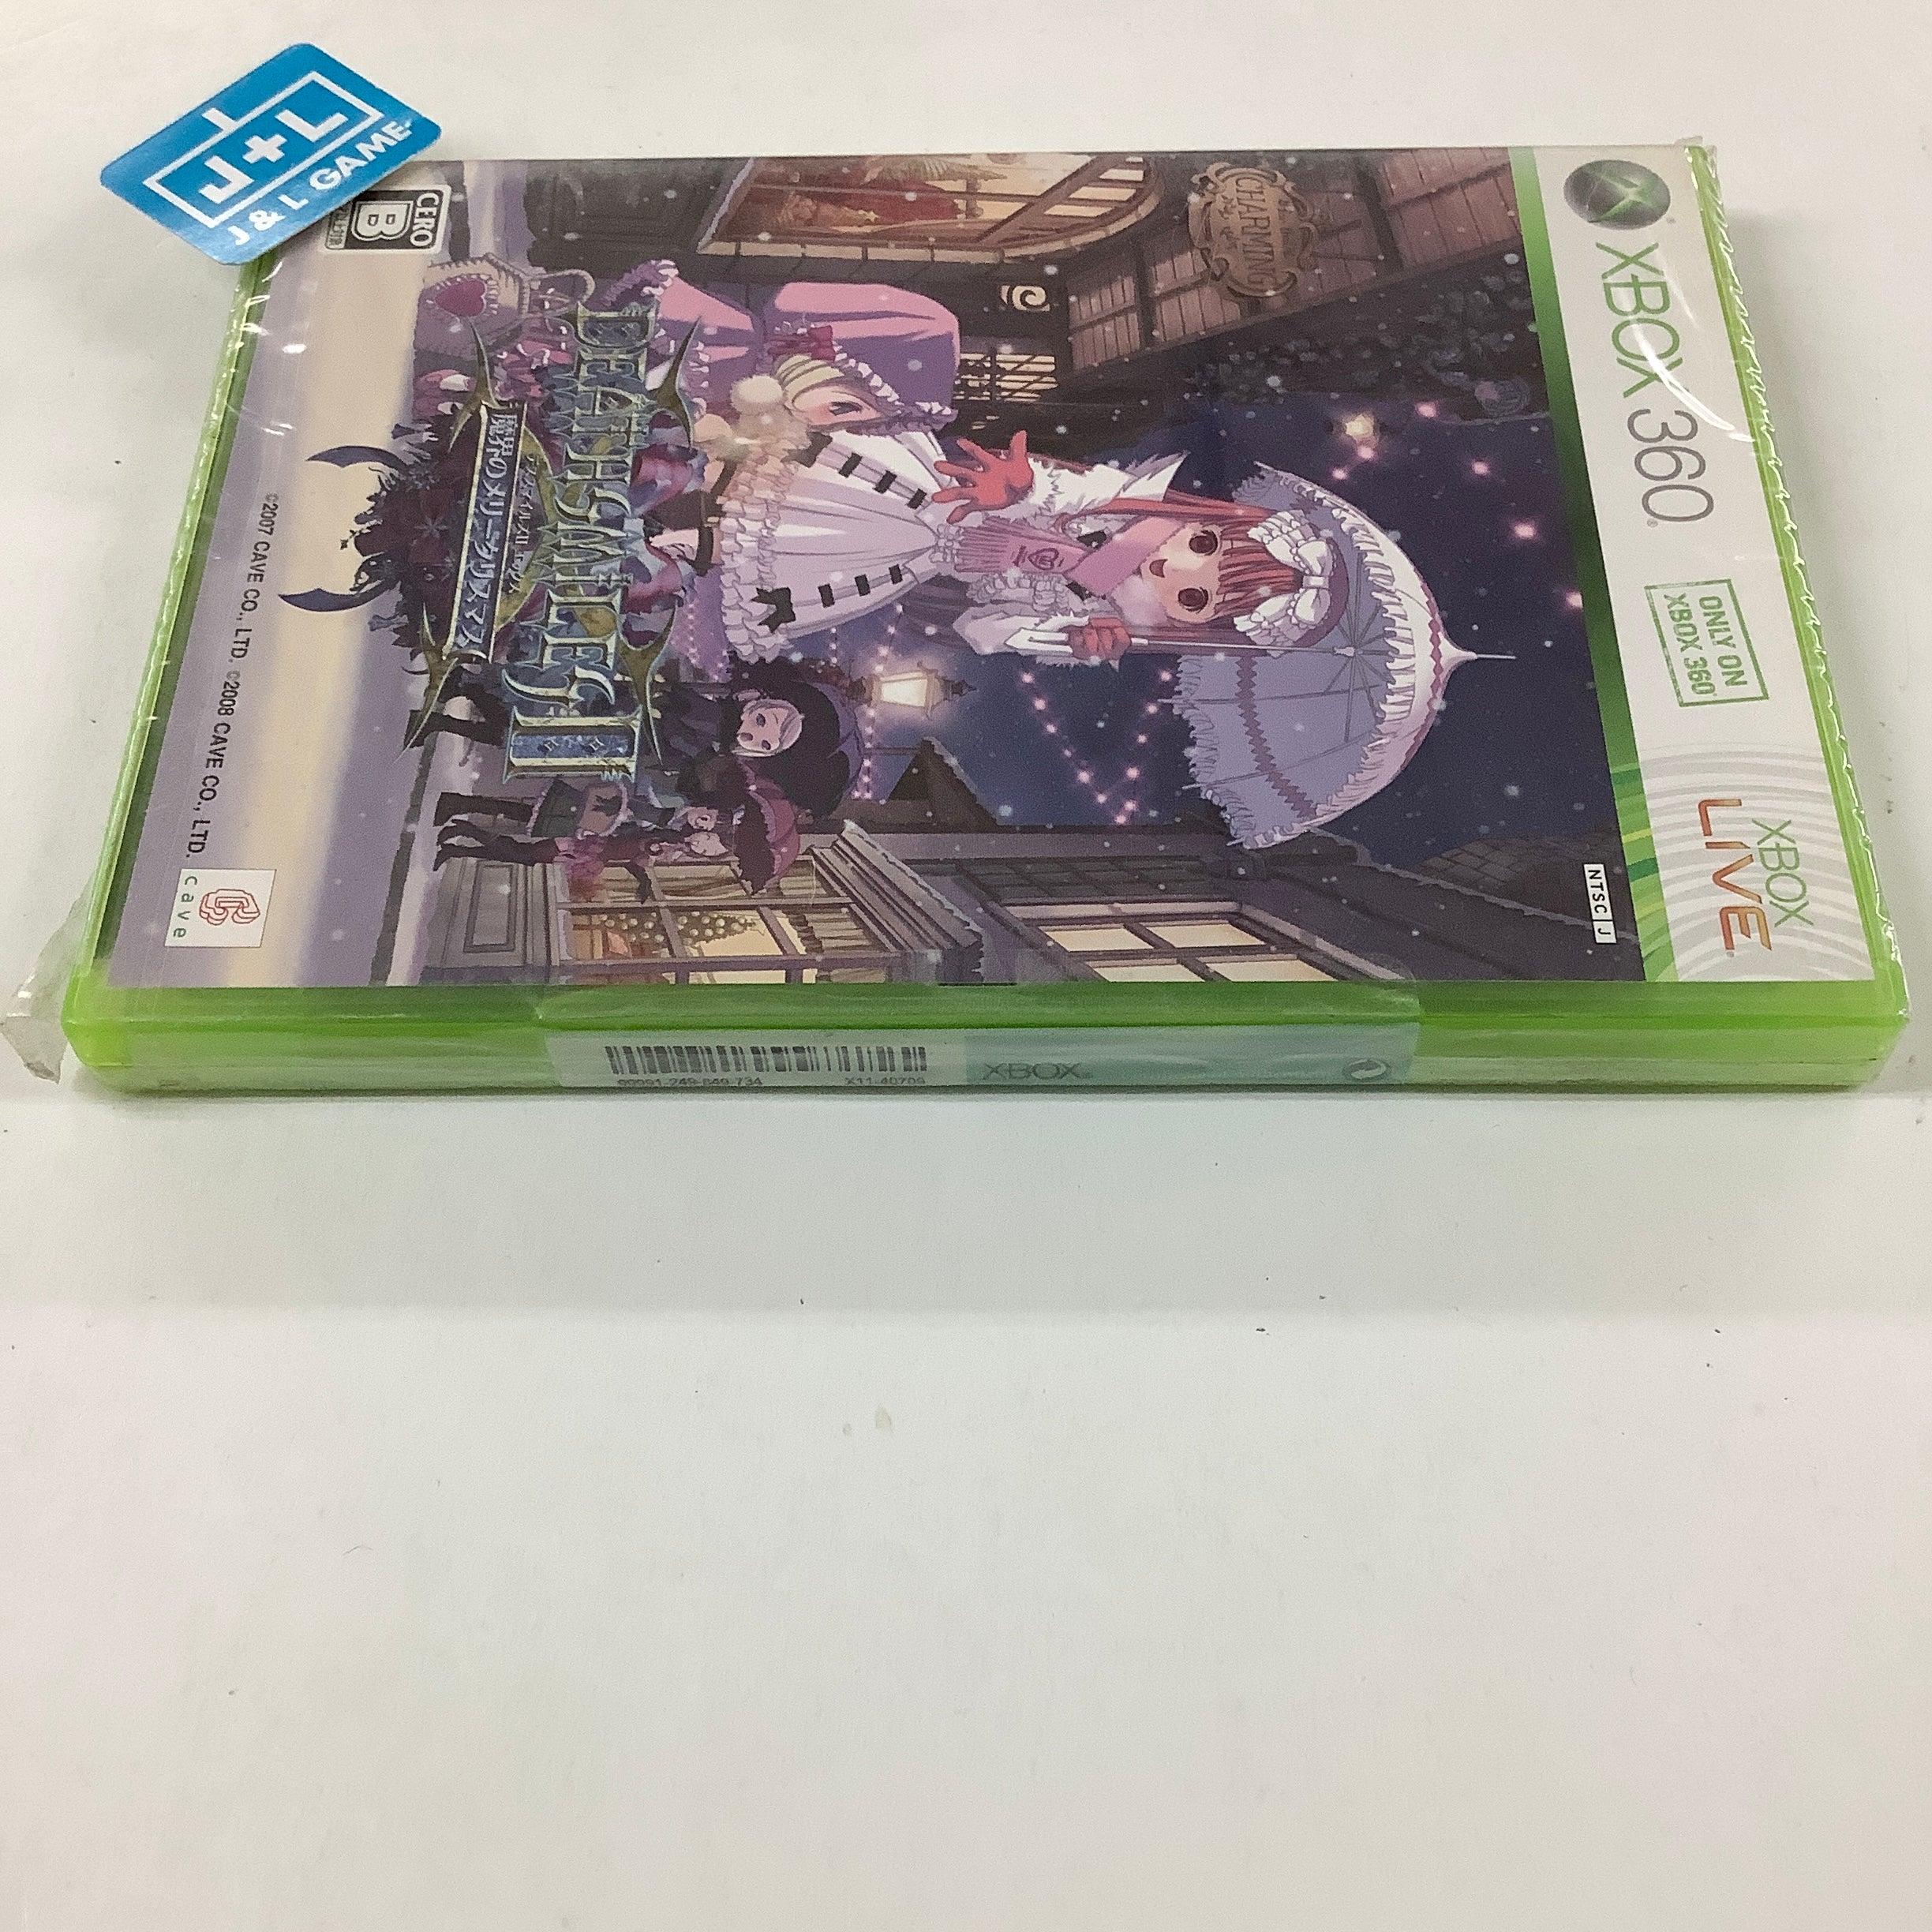 Deathsmiles II X: Makai no Merry Christmas - Xbox 360 (Japanese Import) Video Games Cave   